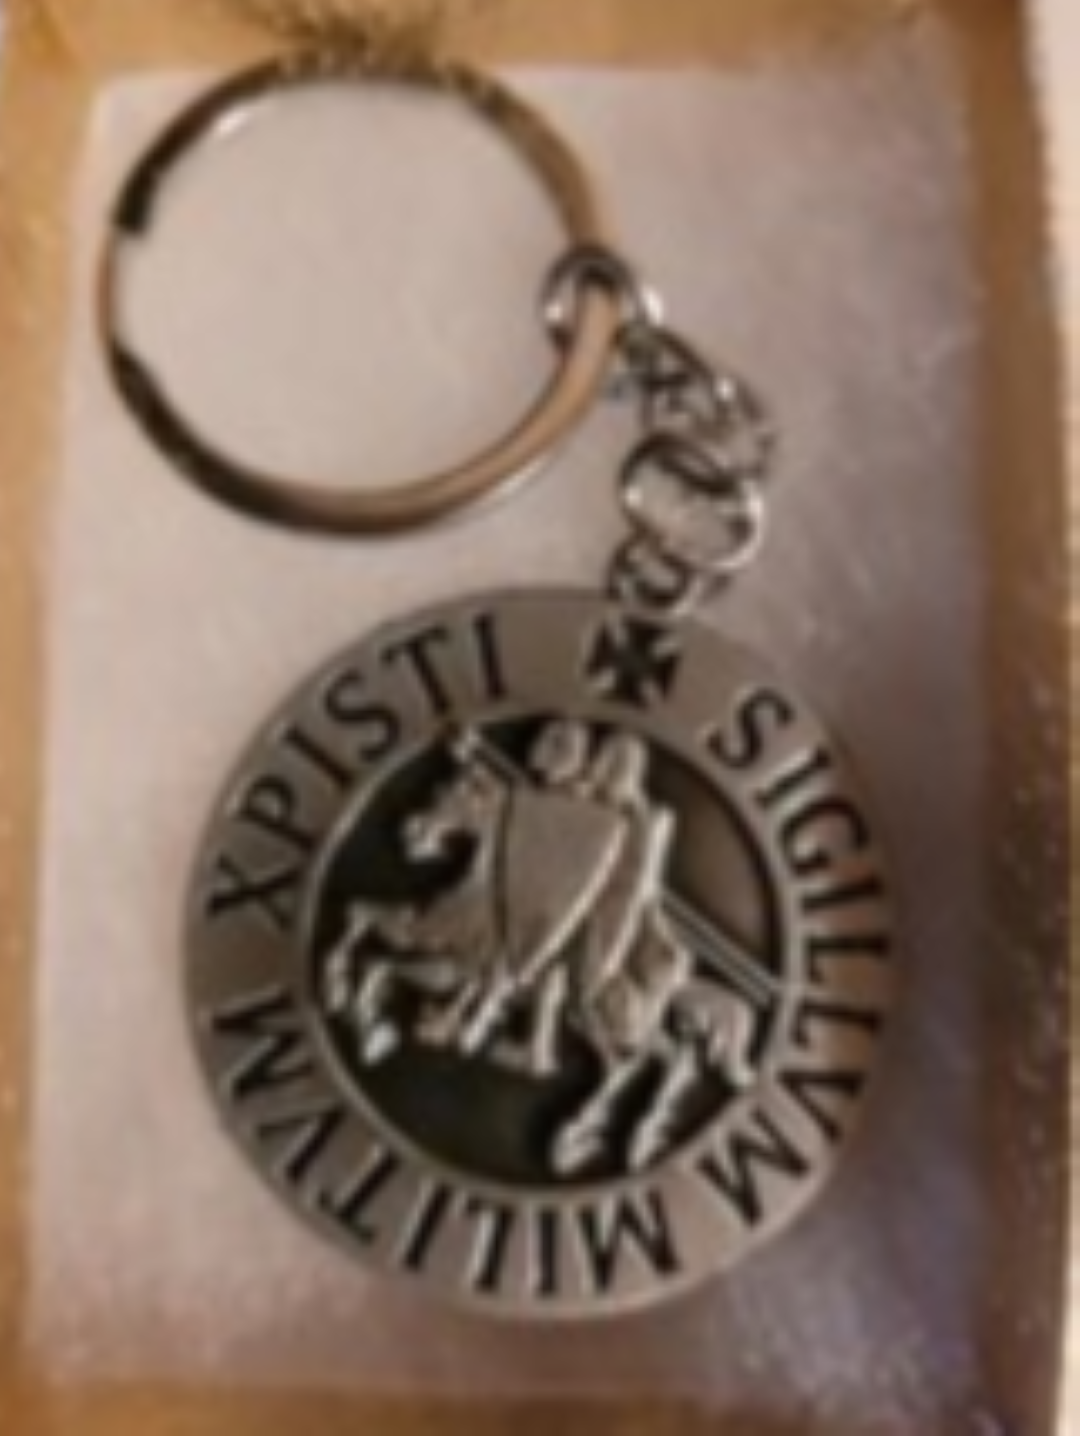 Large two templar knights key ring  large 